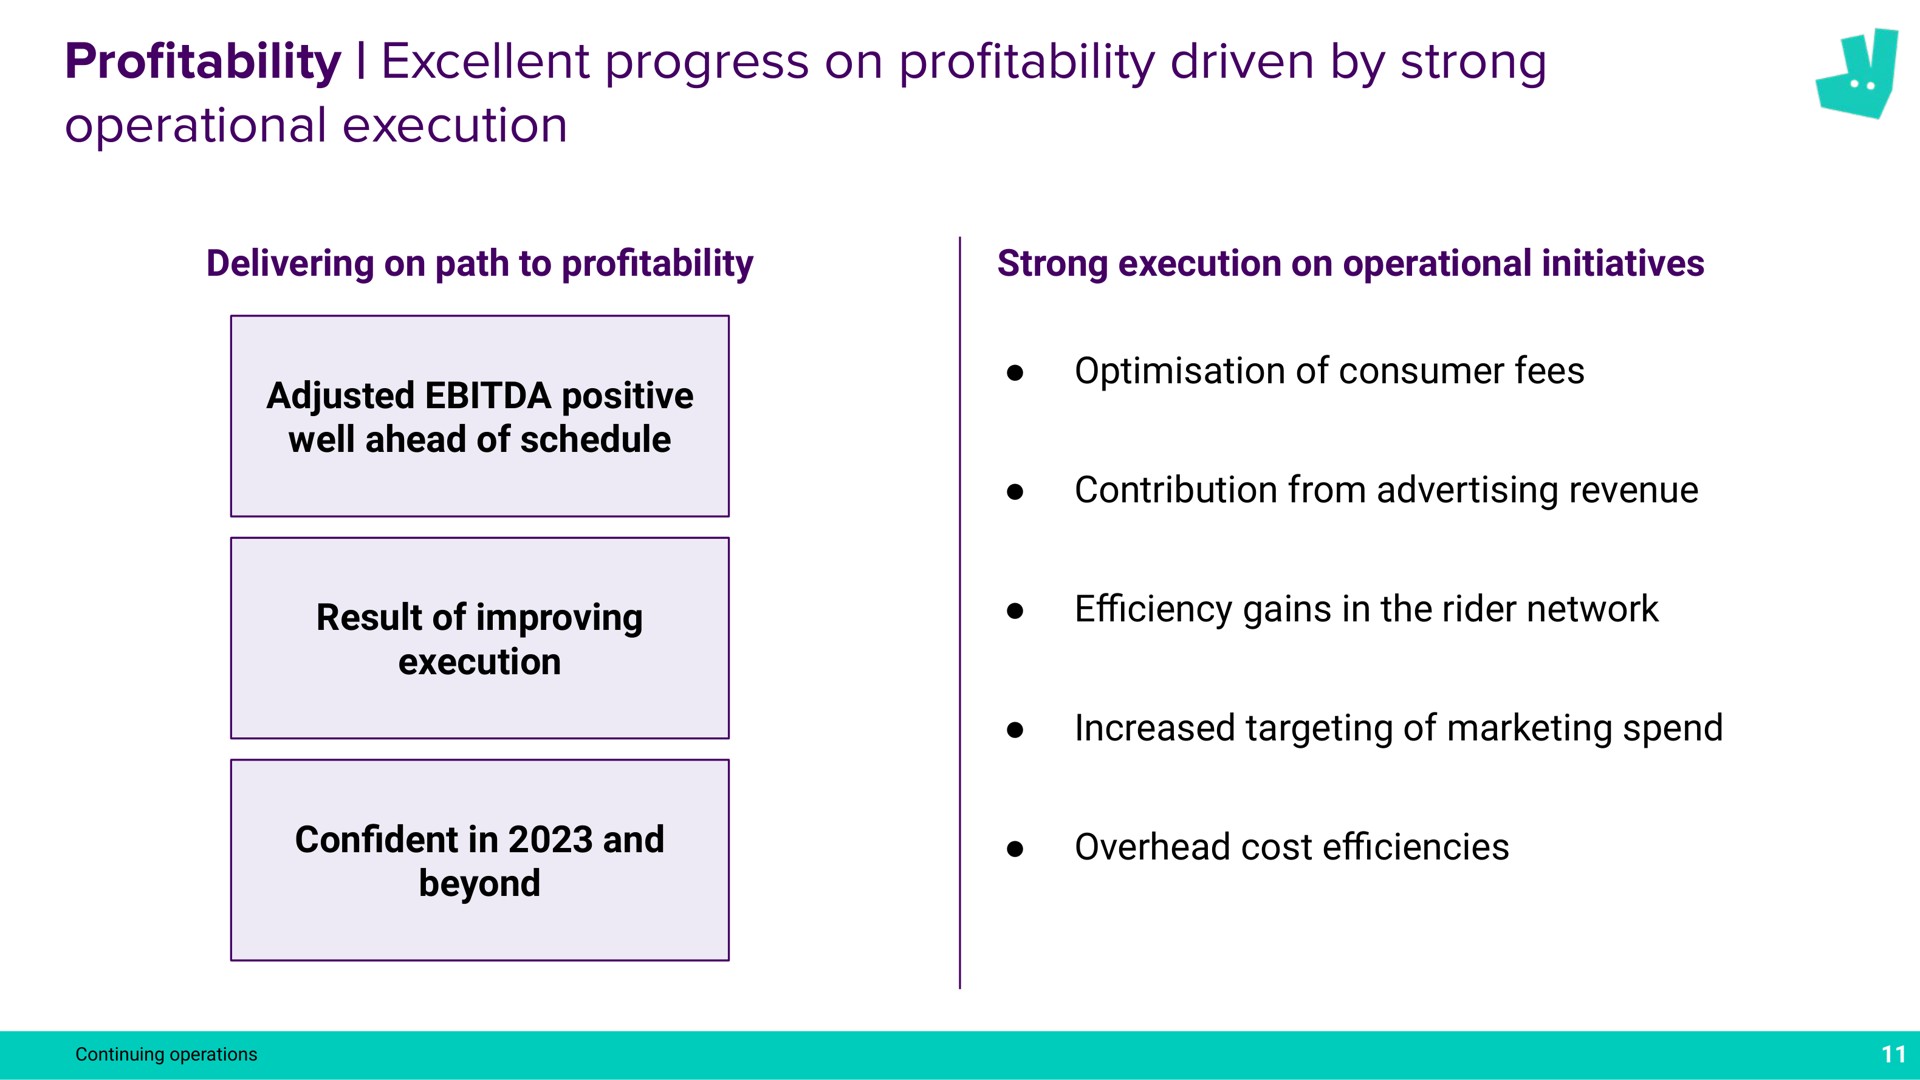 pro excellent progress on pro driven by strong operational execution profitability profitability a | Deliveroo